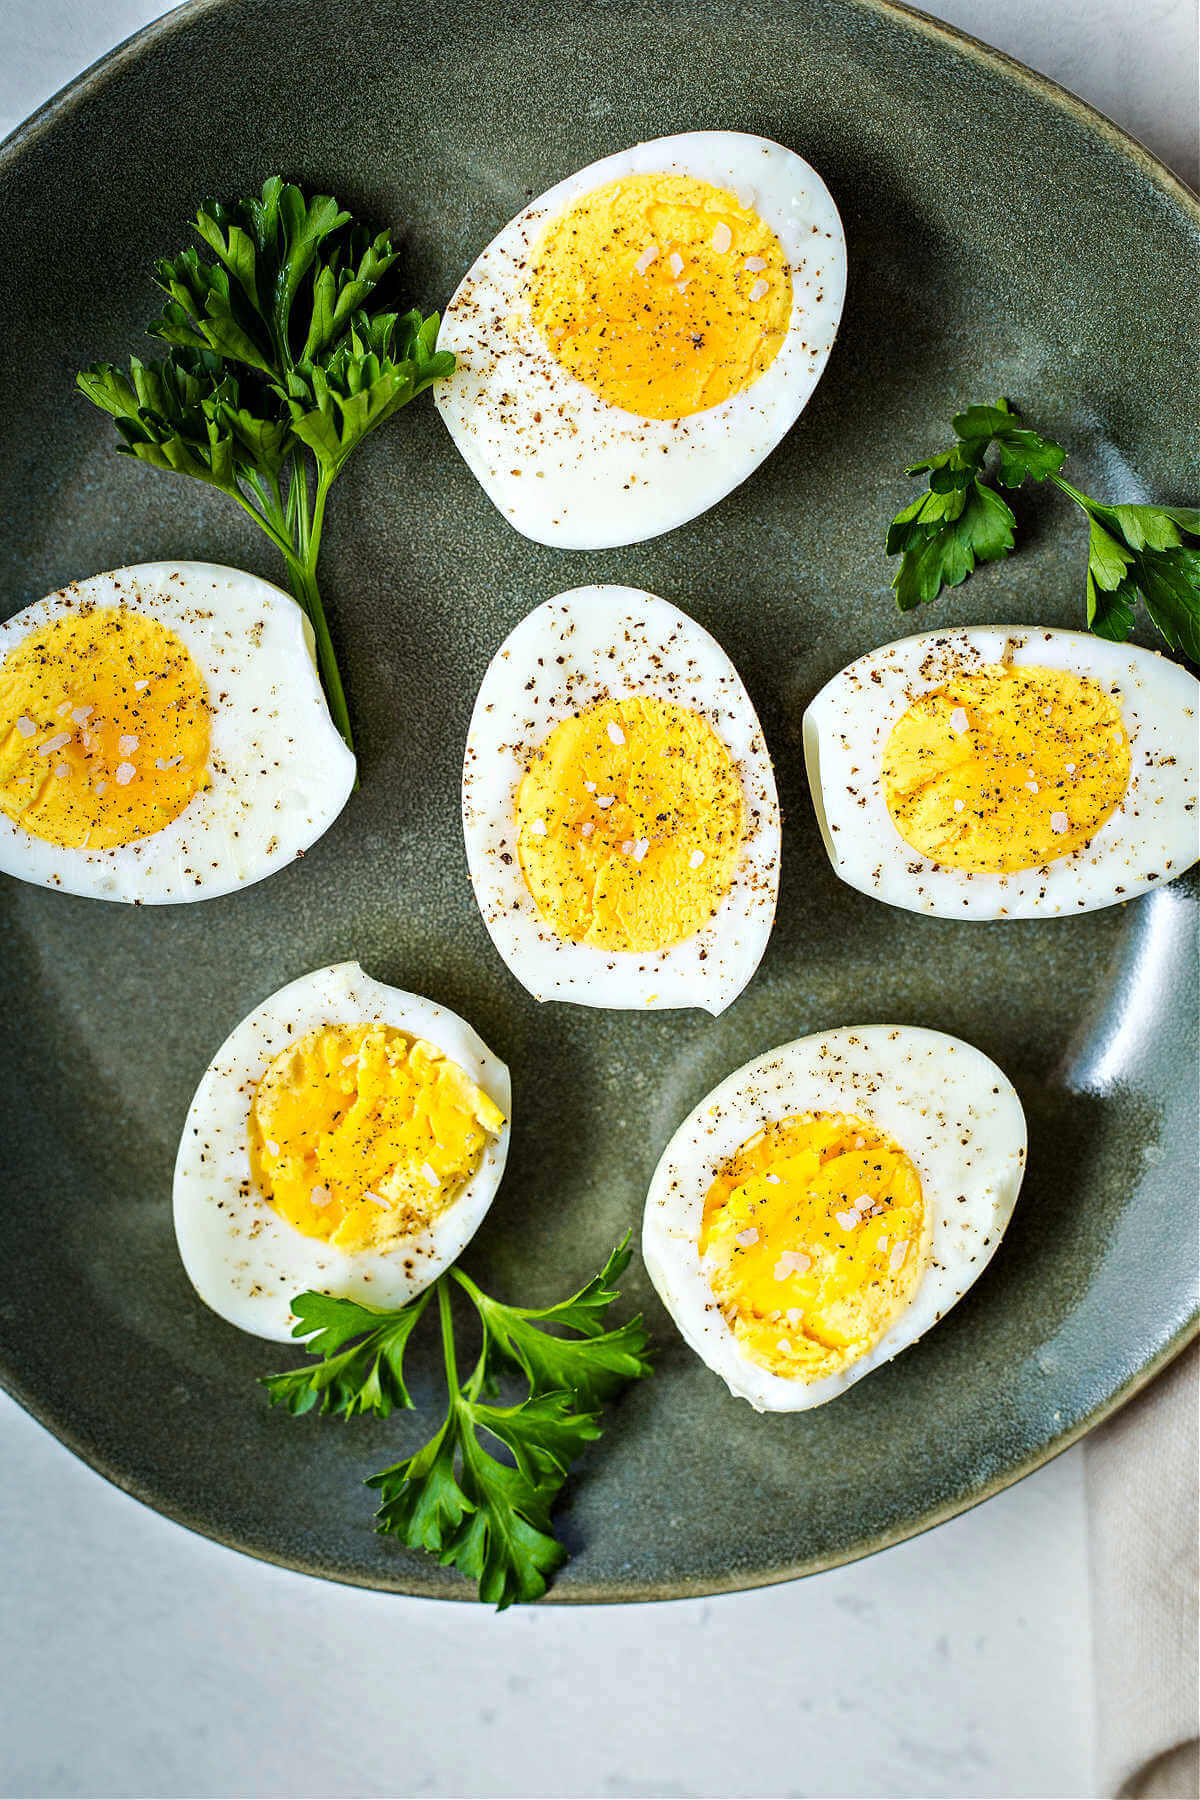 hard boiled eggs sliced in half and sprinkled with salt and pepper on a green plate with parsley garnish.